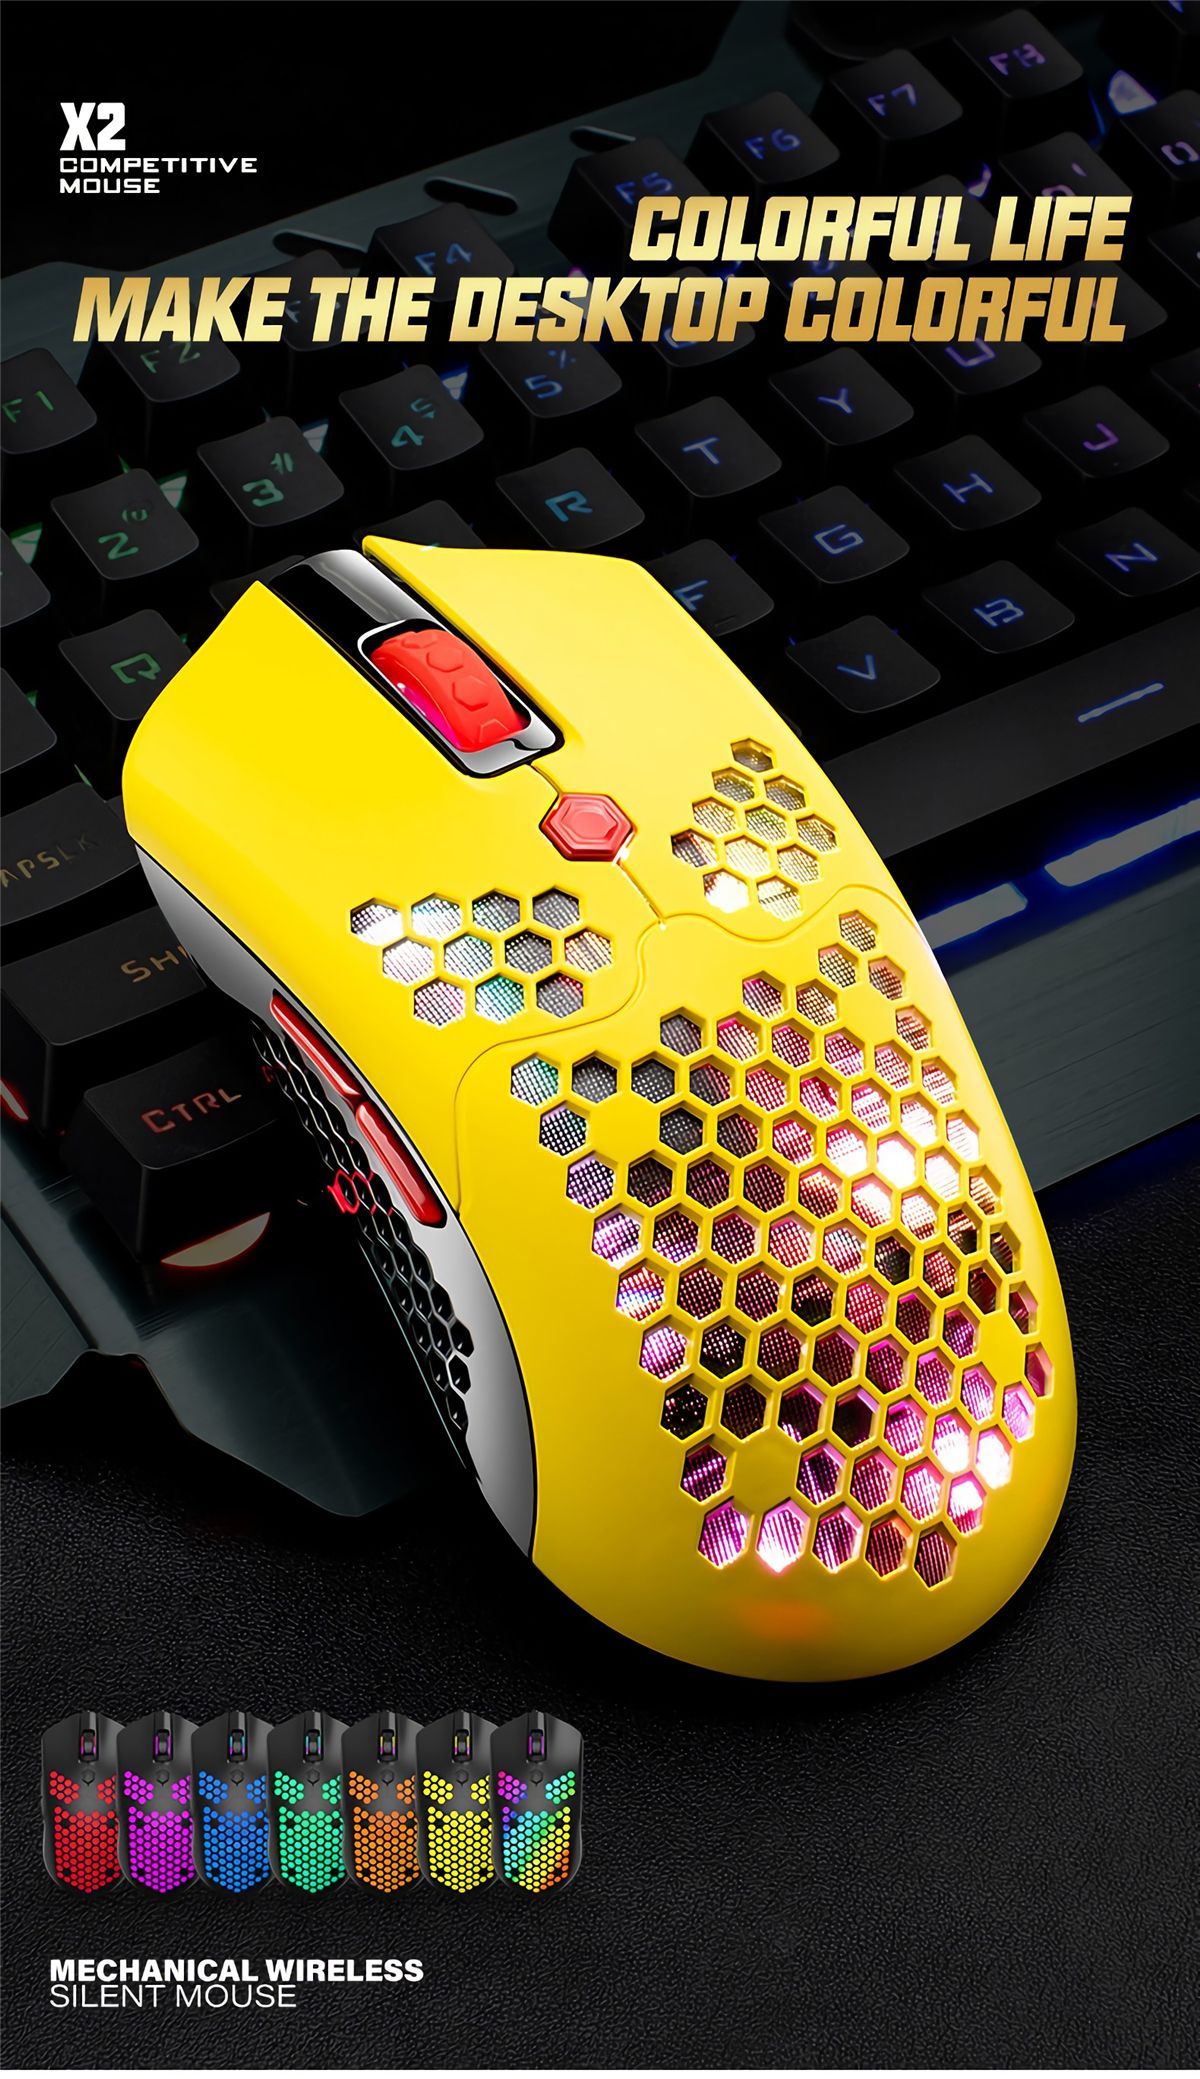 Free-wolf-X2-24G-Wireless-Gaming-Mouse-Hollow-Honeycomb-Rechargeable-12000DPI-7-Buttons-Ergonomic-RG-1738379